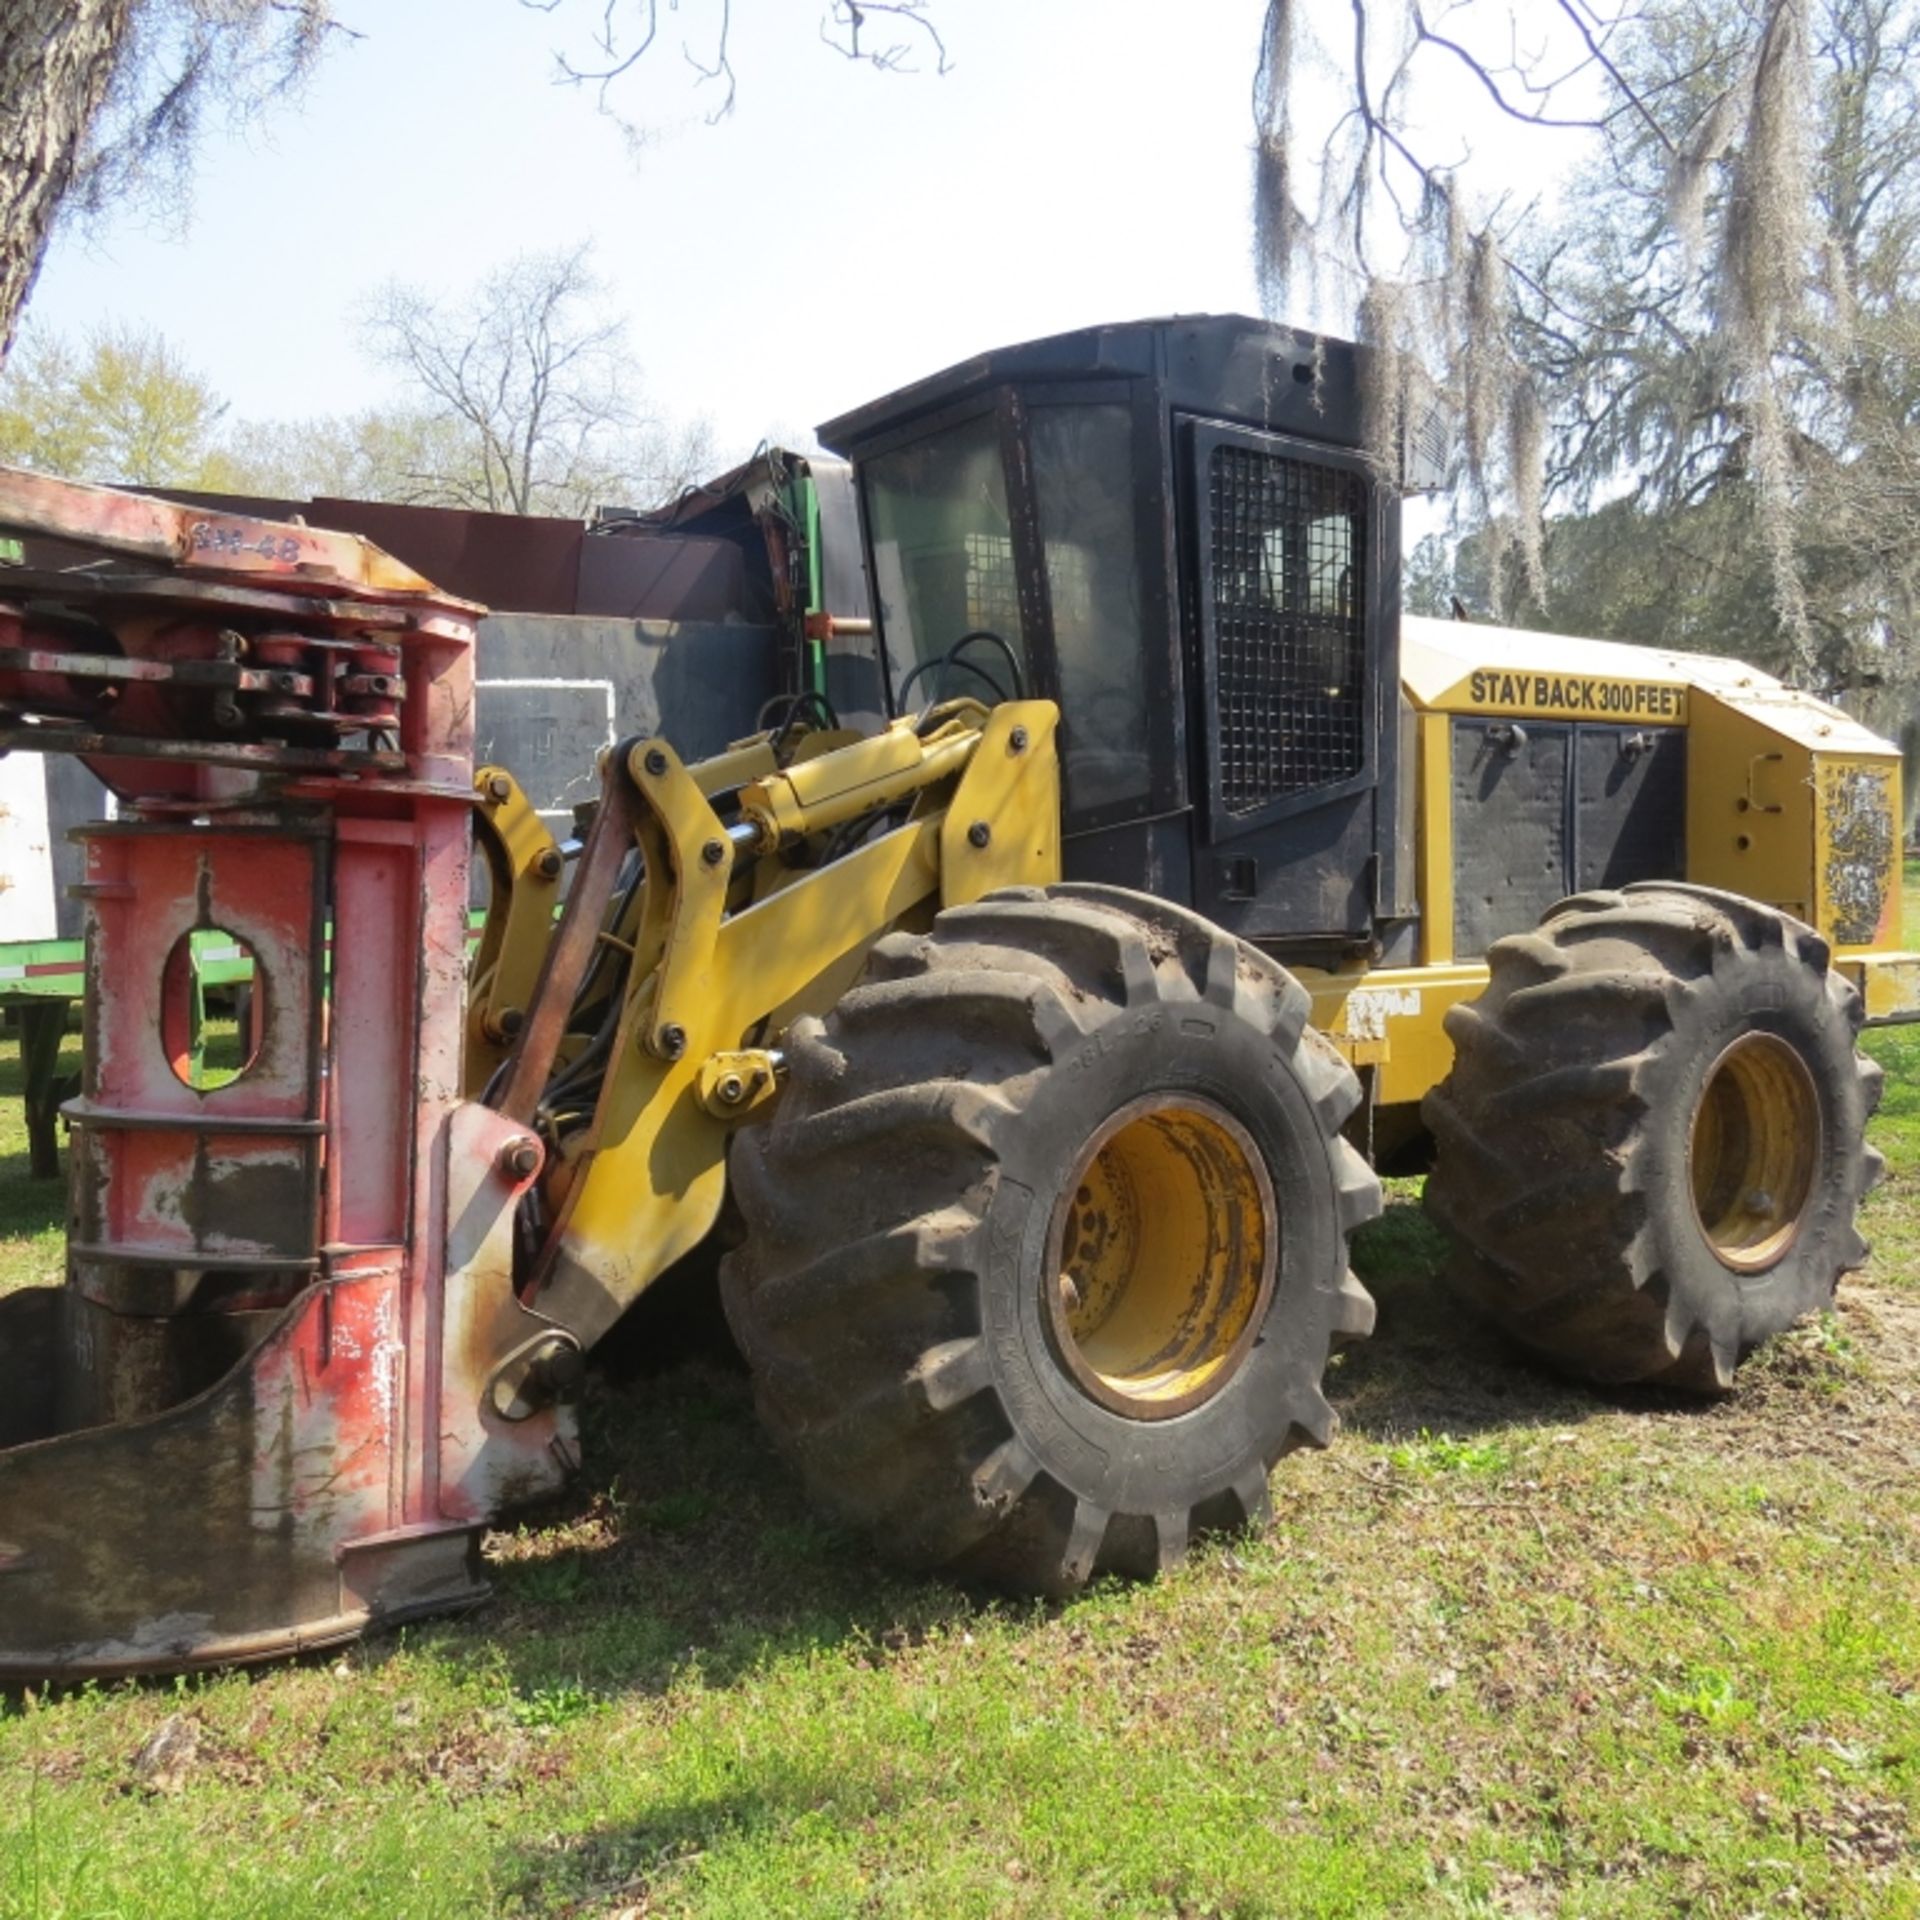 2007 CAT 553 Joystick Control SH-48 Sawhead & Side Pockets 6458 hours showing 28L-26 Tires S/N: